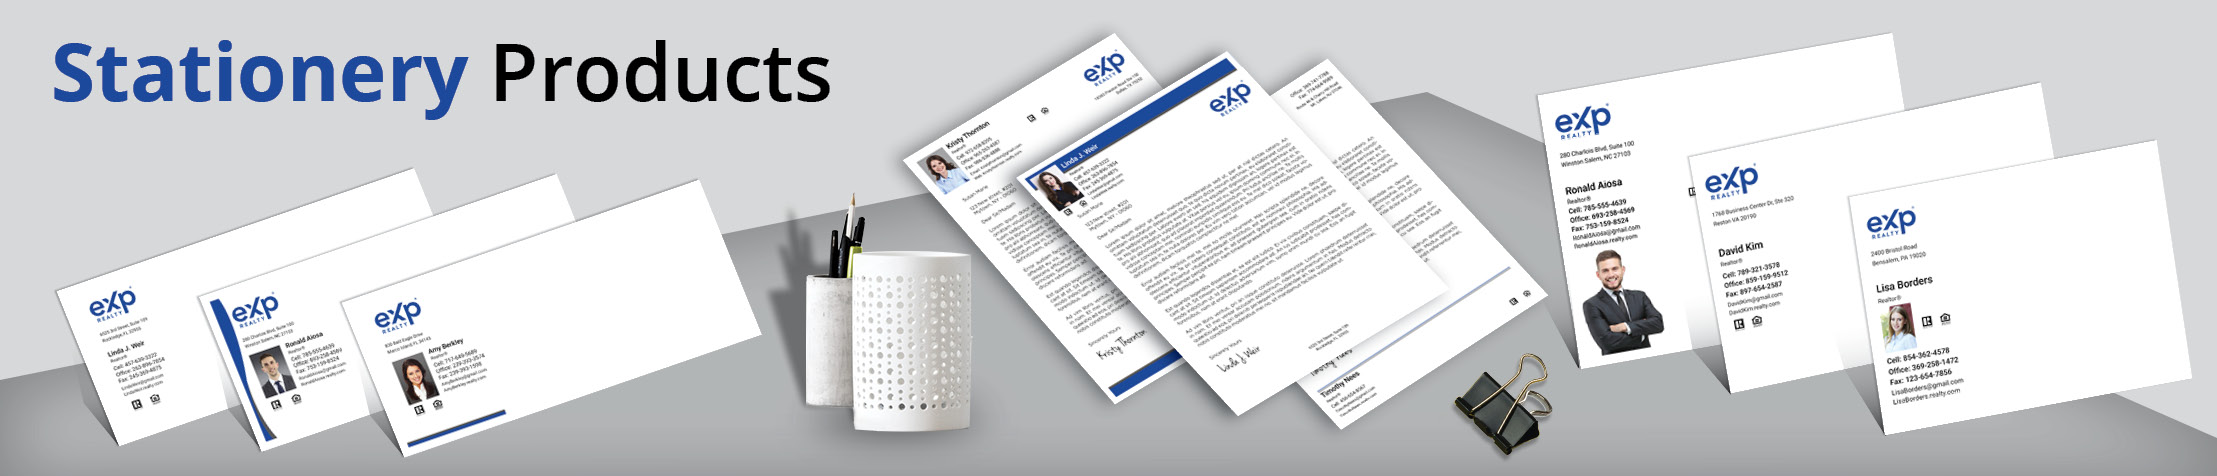 Real Estate Stationery Products - Custom Letterhead & Envelopes Stationery Products for Realtors | BestPrintBuy.com